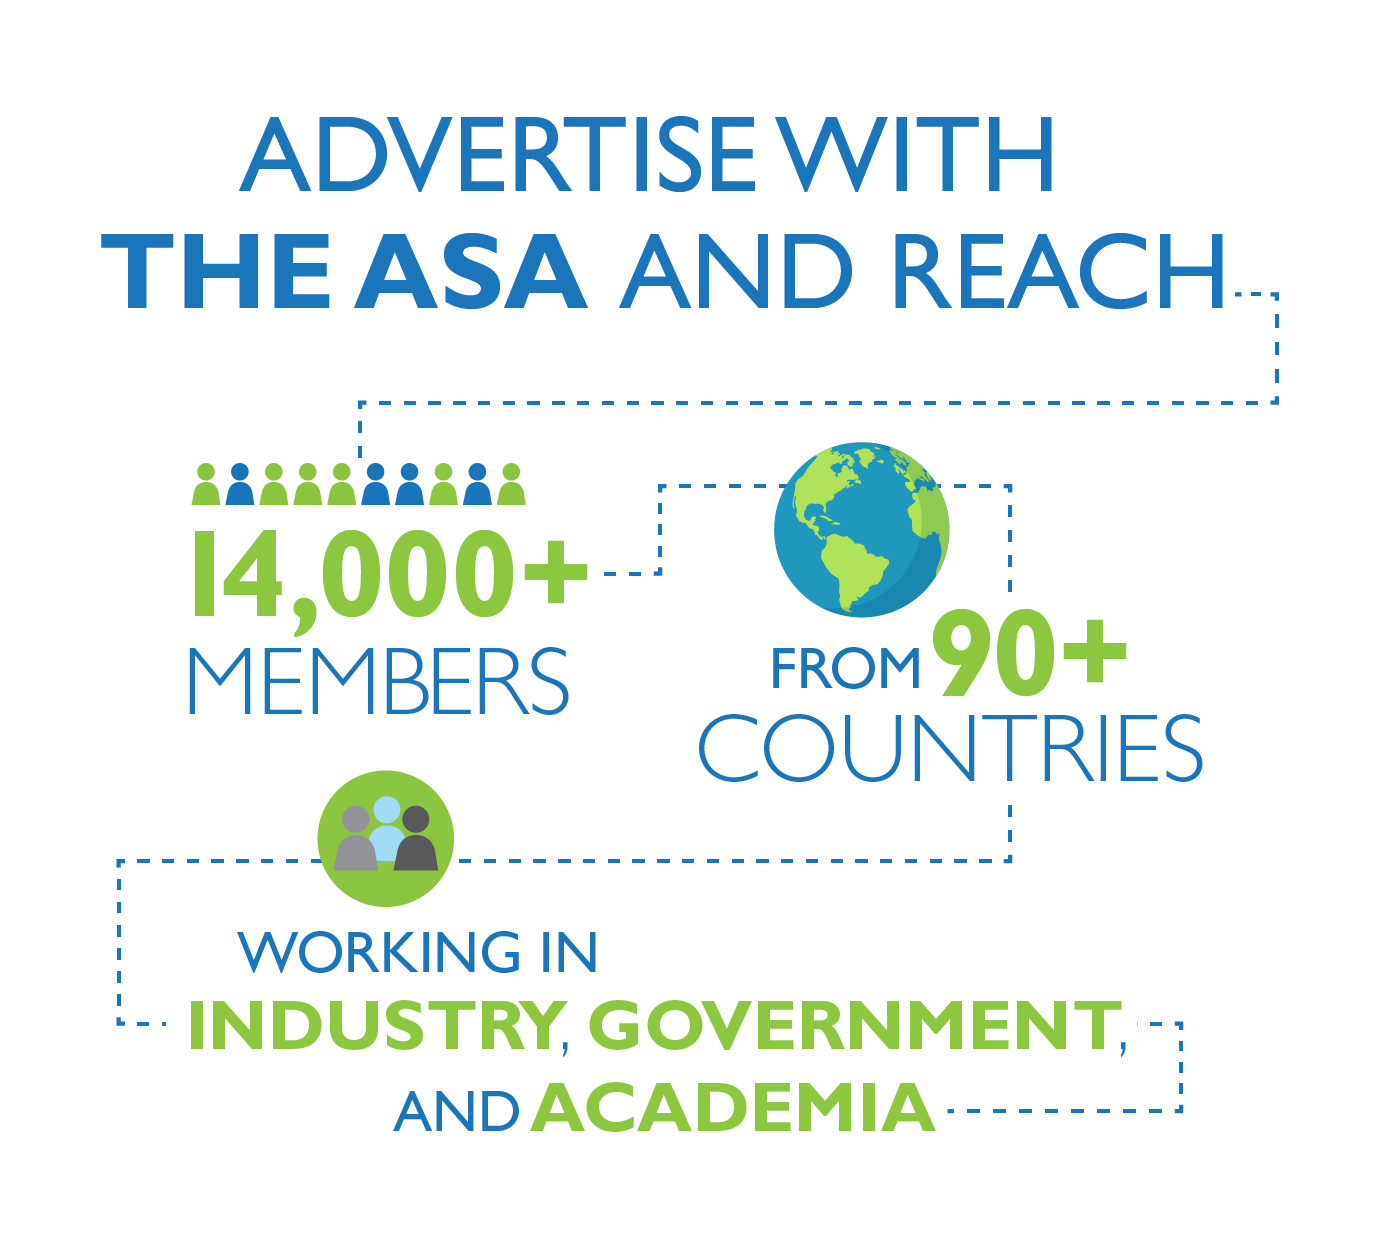 Advertise with the ASA!